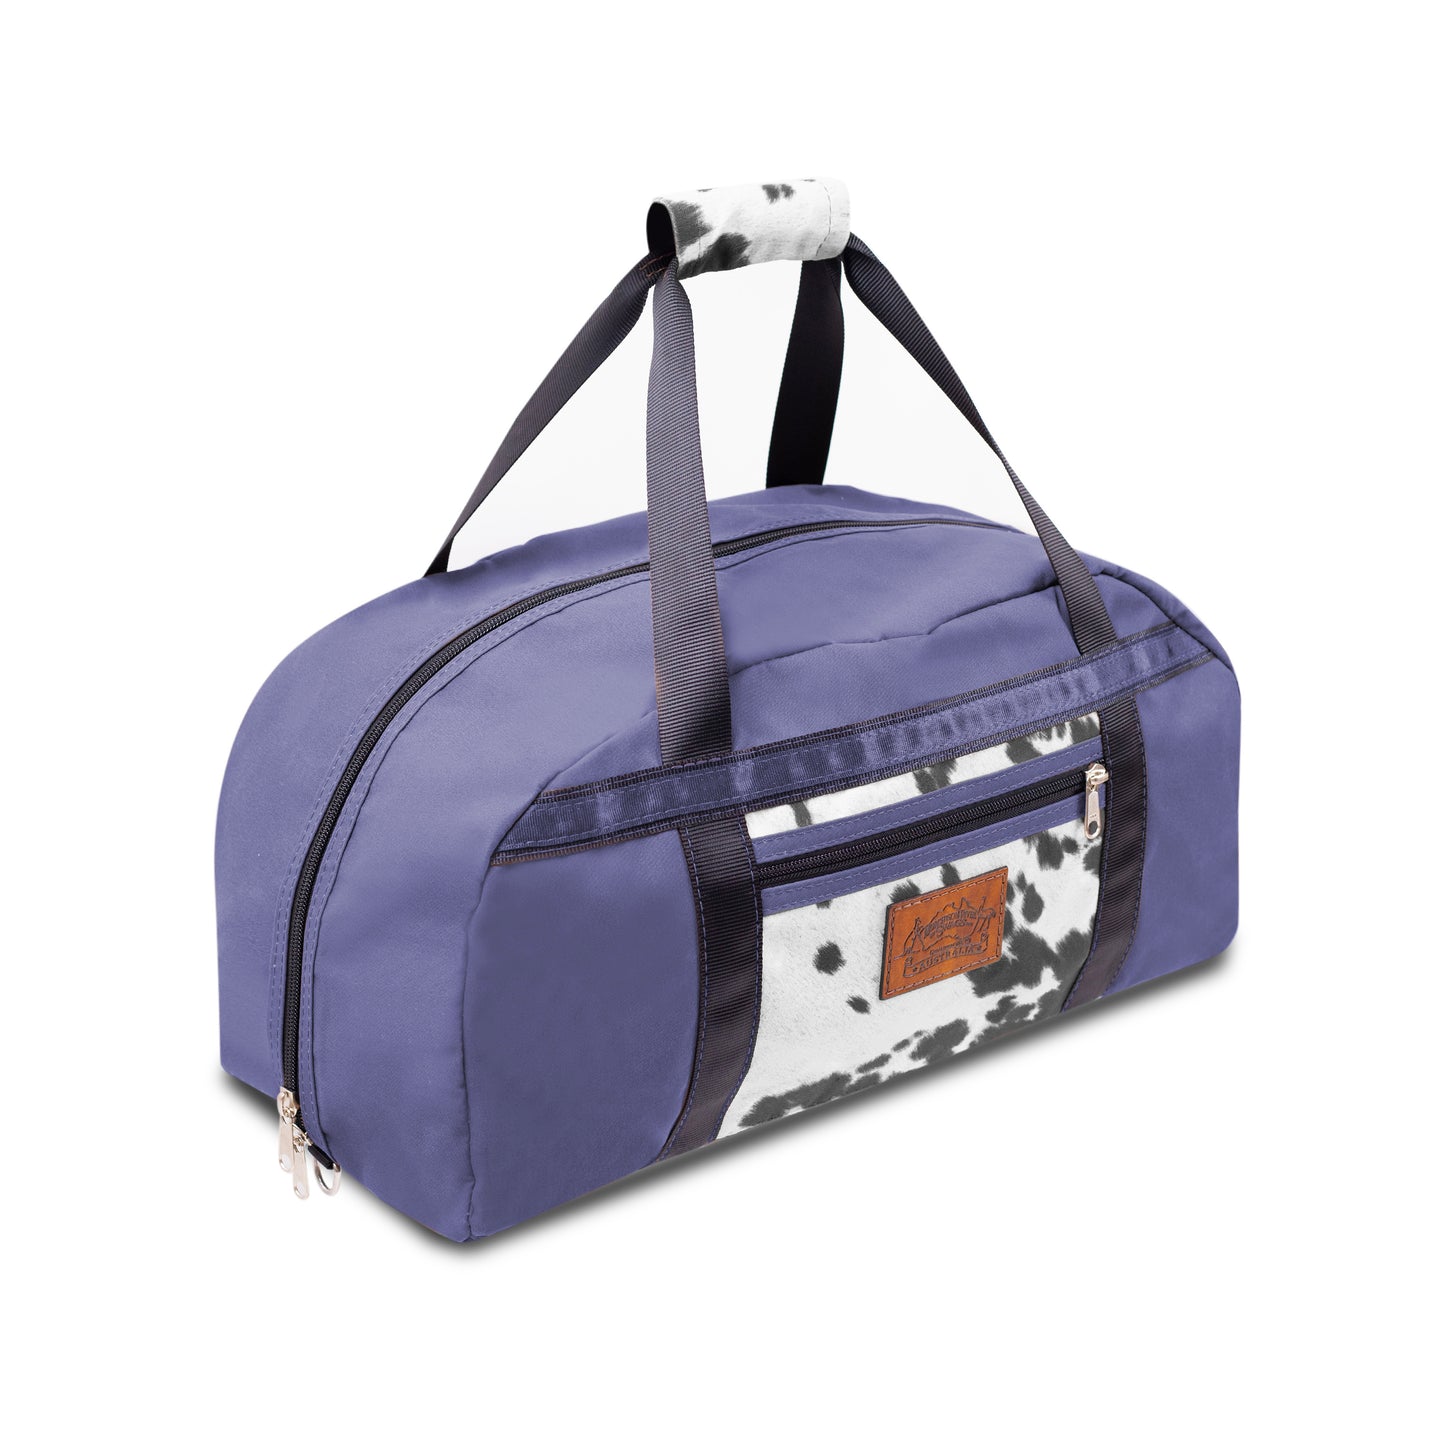 Navy Blue Canvas Travel Bag with limited edition cow print fabric.